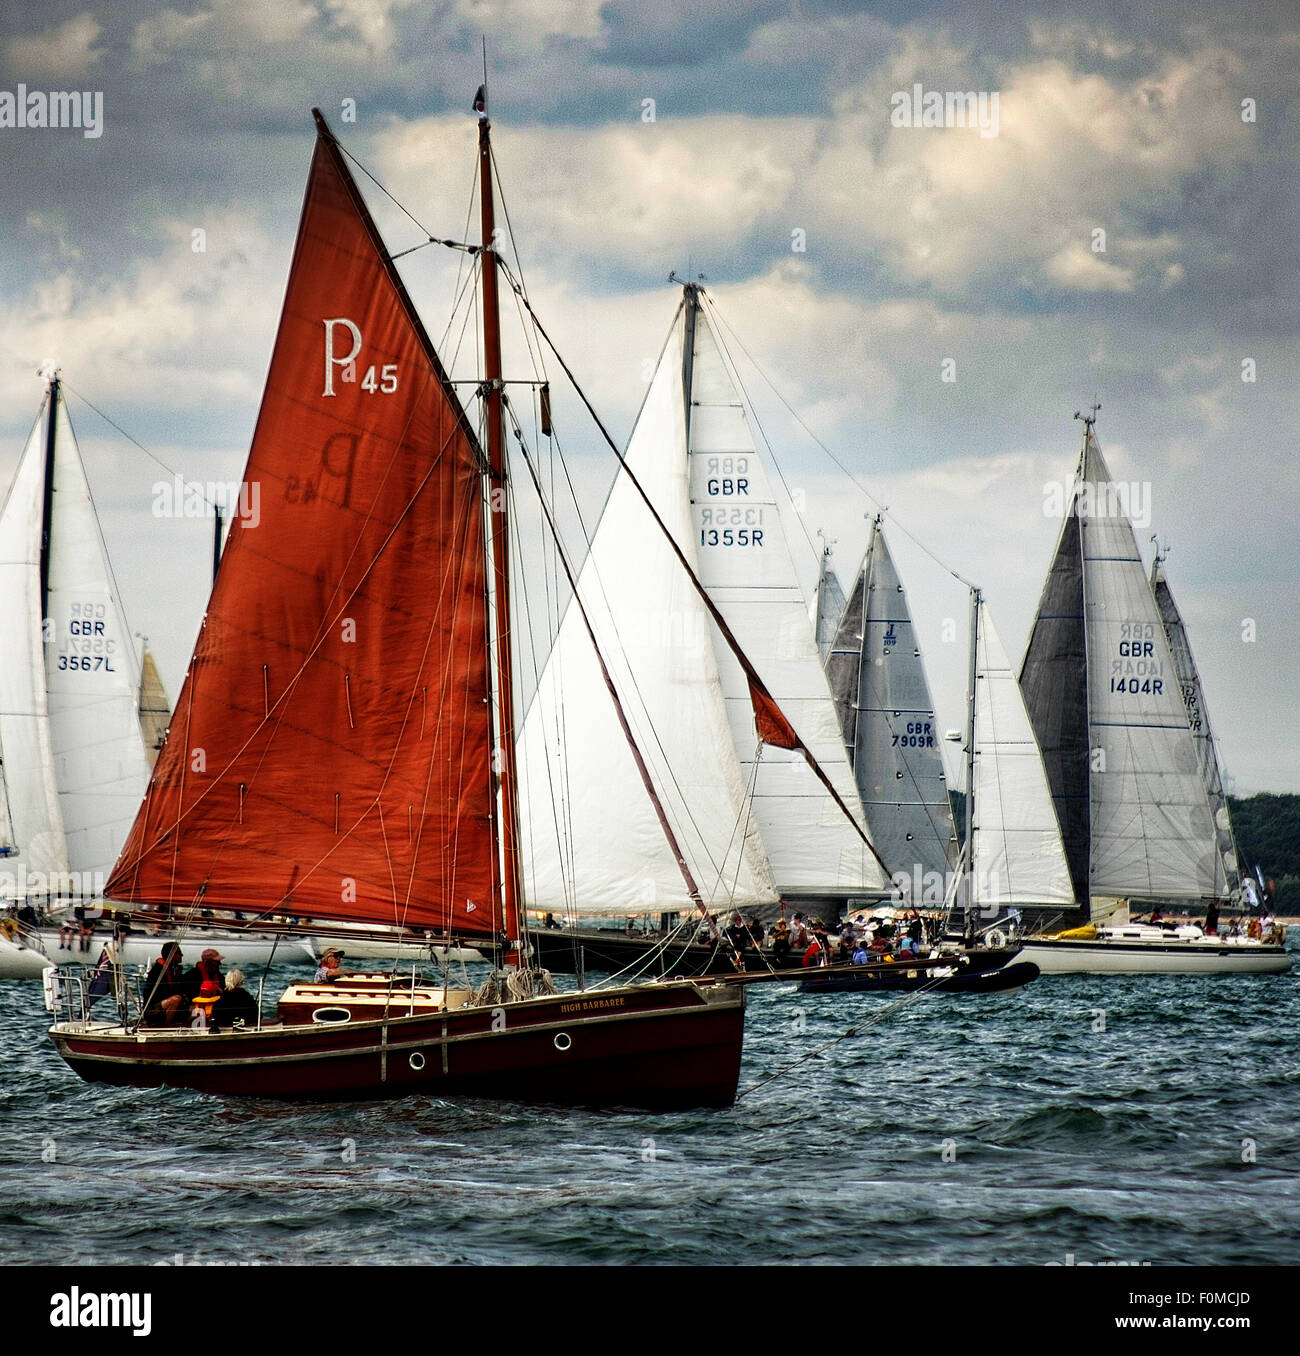 An old gaffer sailing vessel cruises against the traffic at the start of the Fastnet Race 2015 at Cowes, Isle of Wight Stock Photo